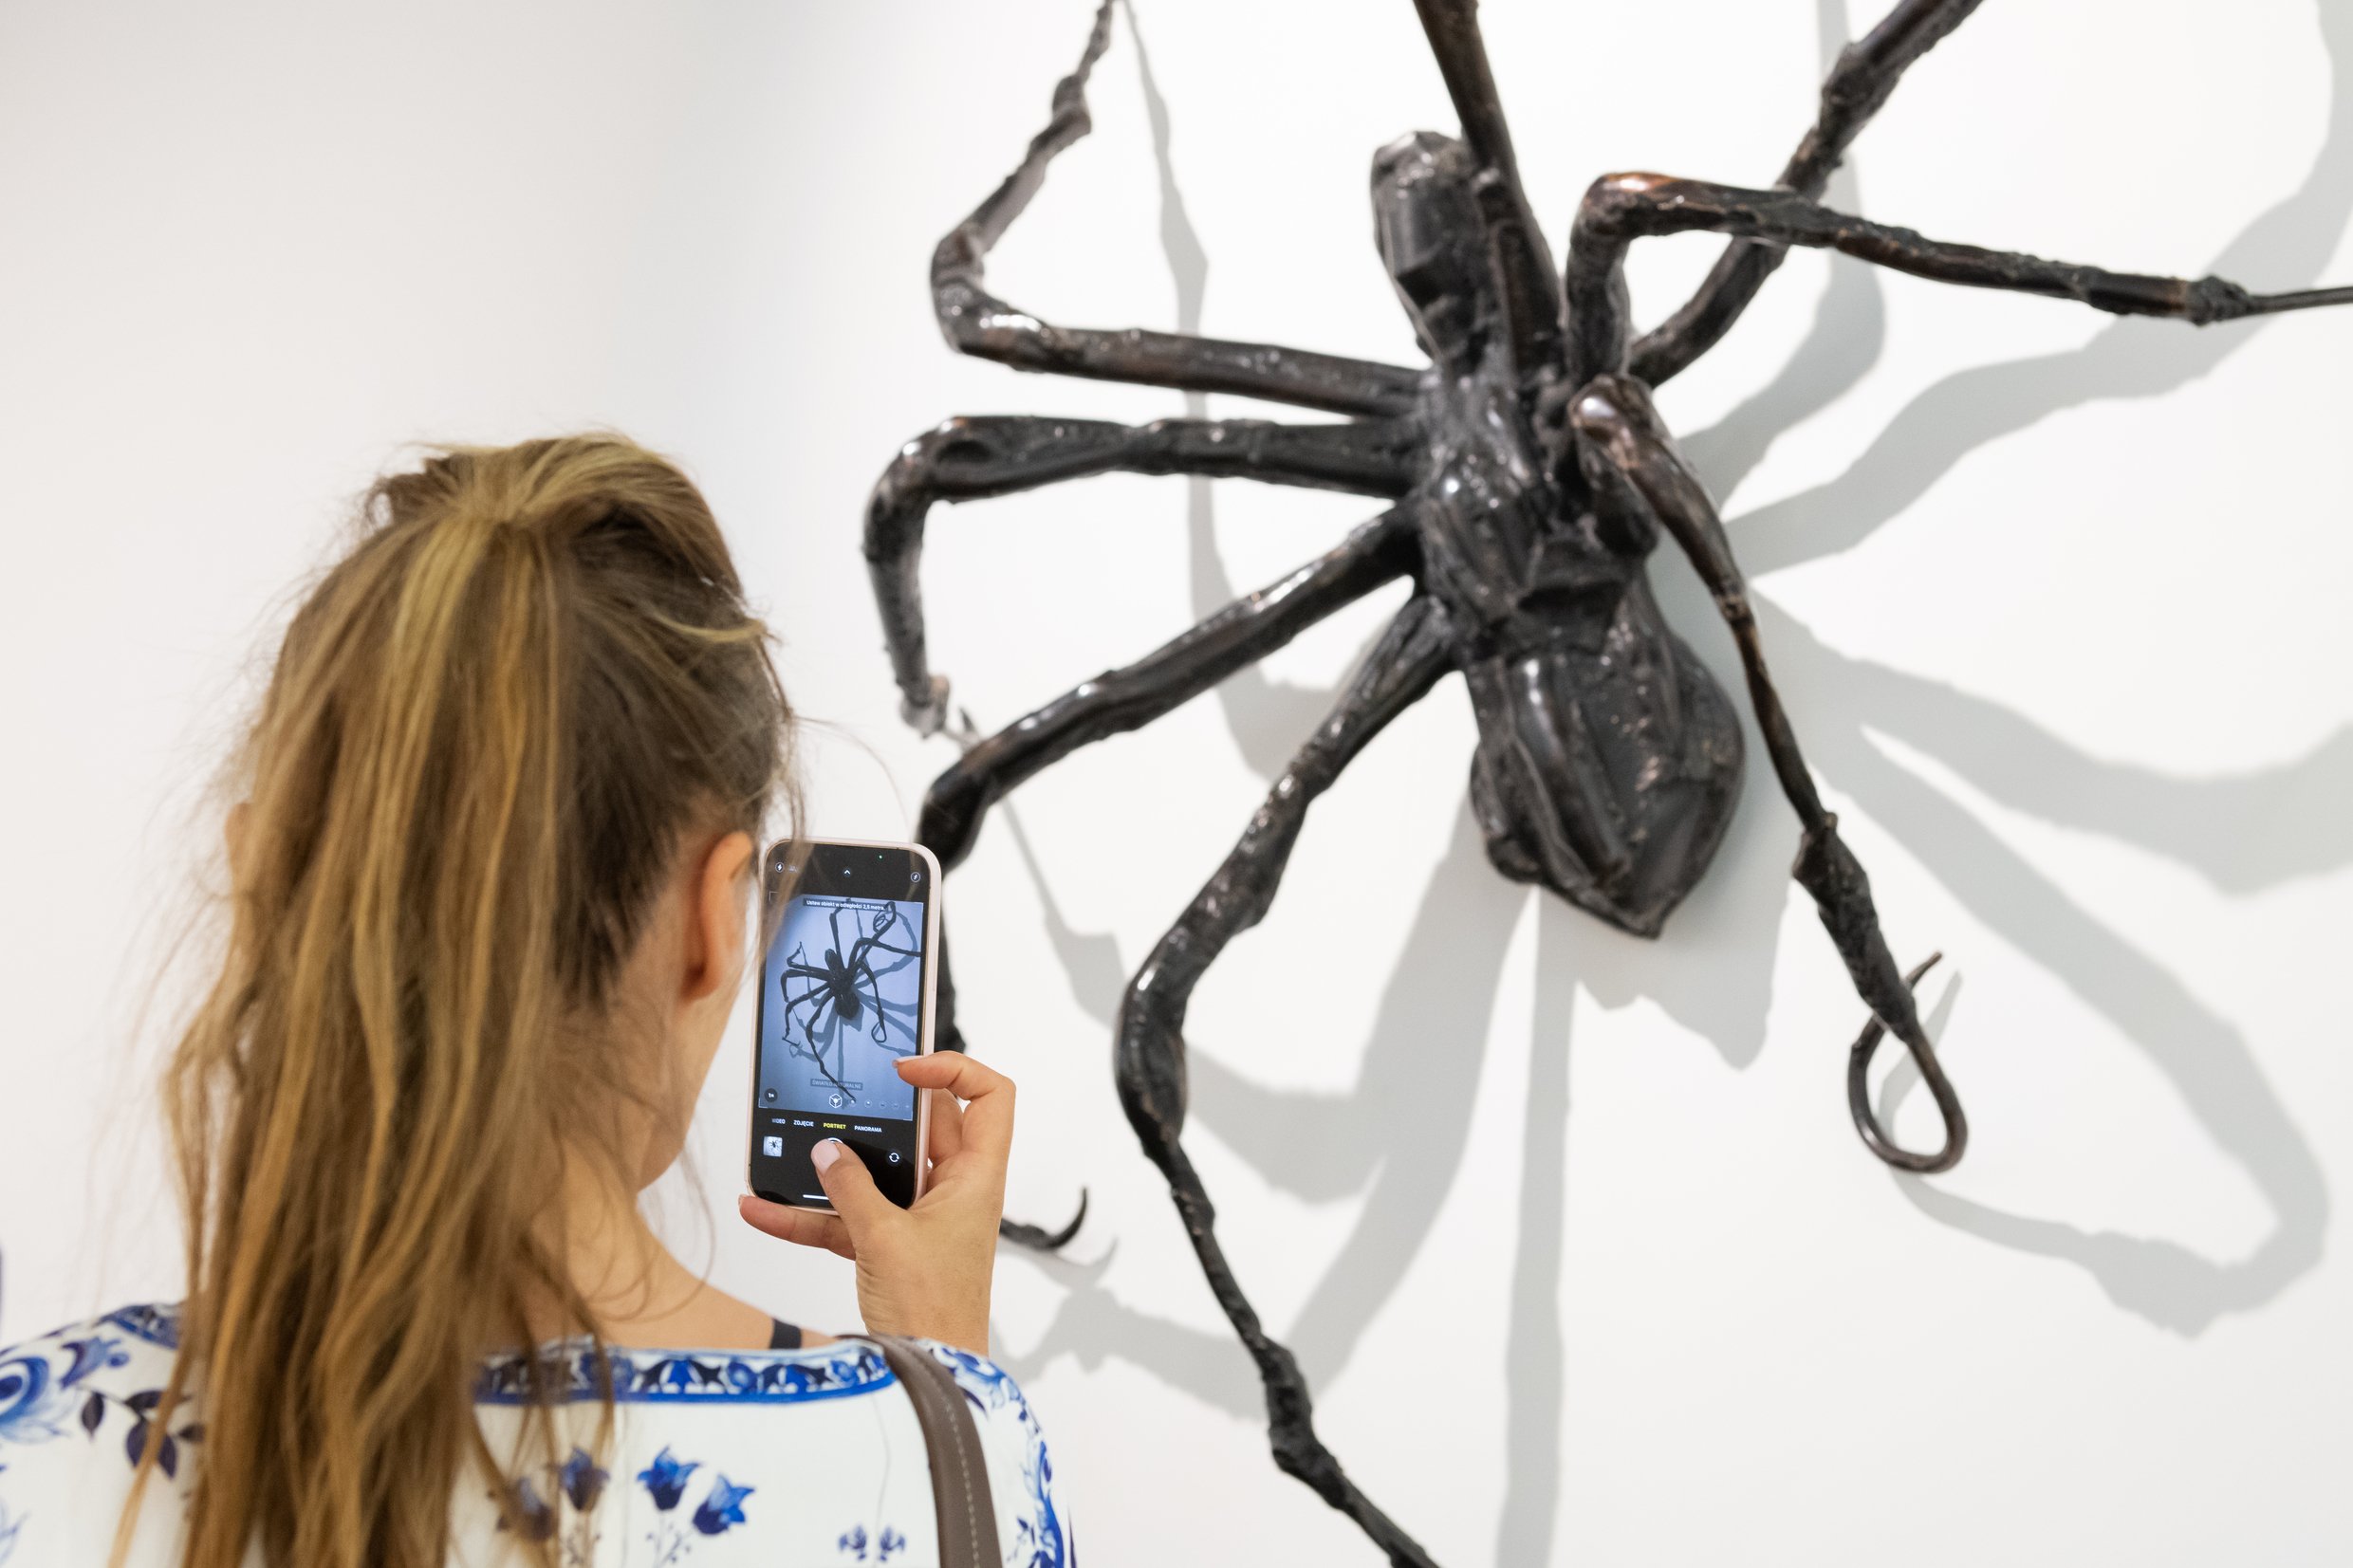 Louise Bourgeois's Spiders - For Sale on Artsy